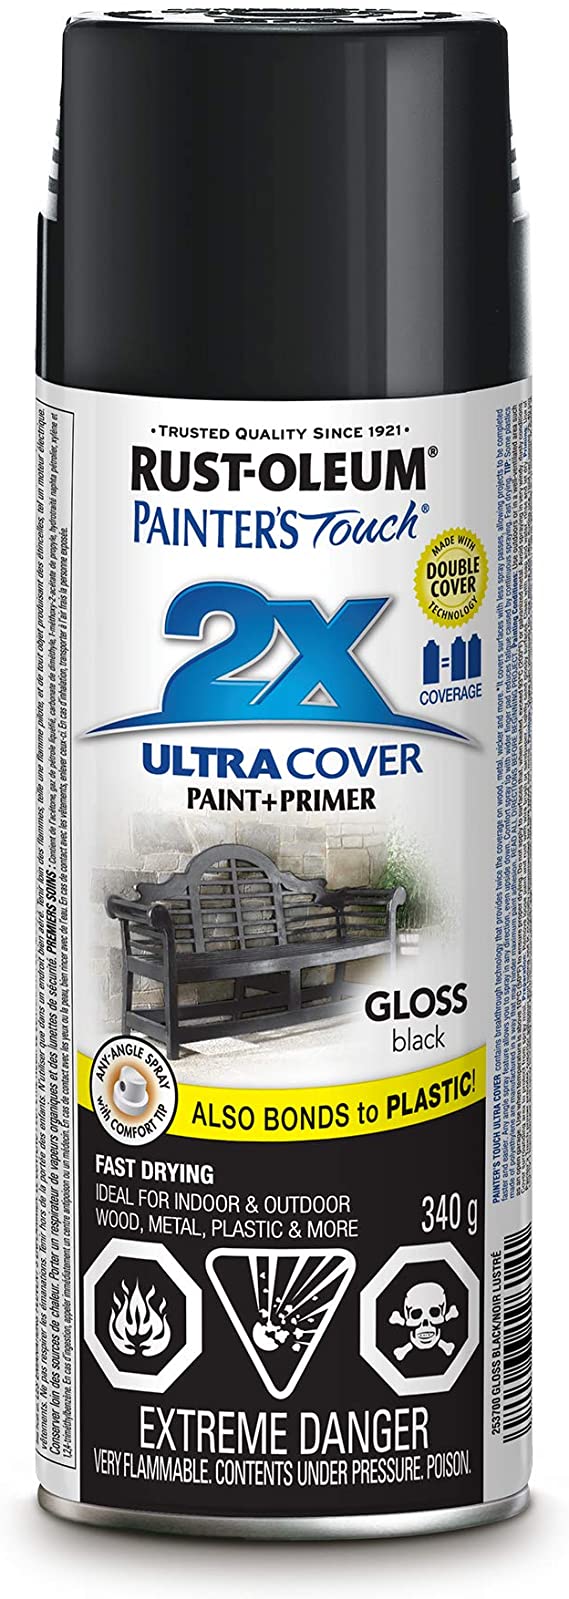 Painter's Touch 2X Ultra Cover in Gloss Black, 340g